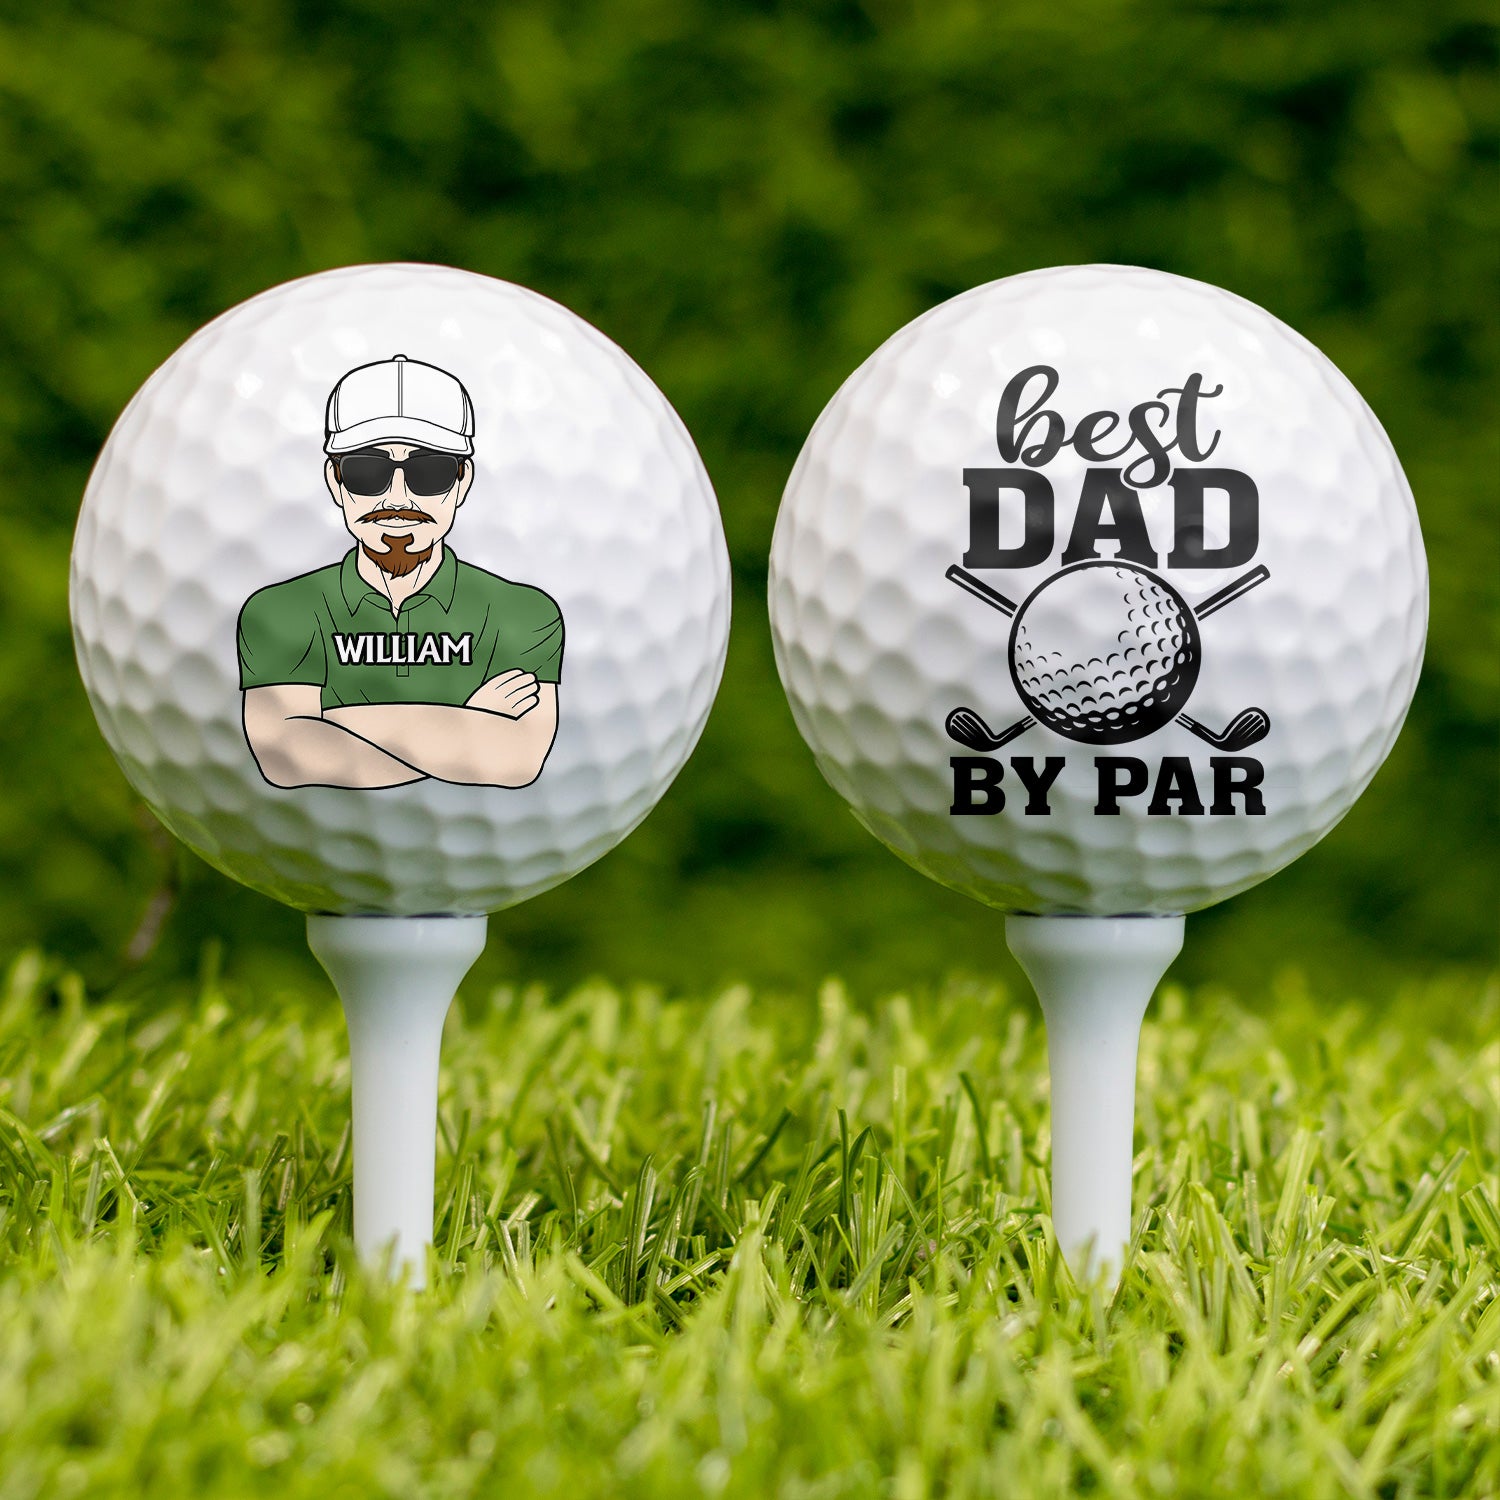 Best Dad By Par - Gift For Dad, Father, Grandpa, Golfer, Golf Lover - Personalized Golf Ball